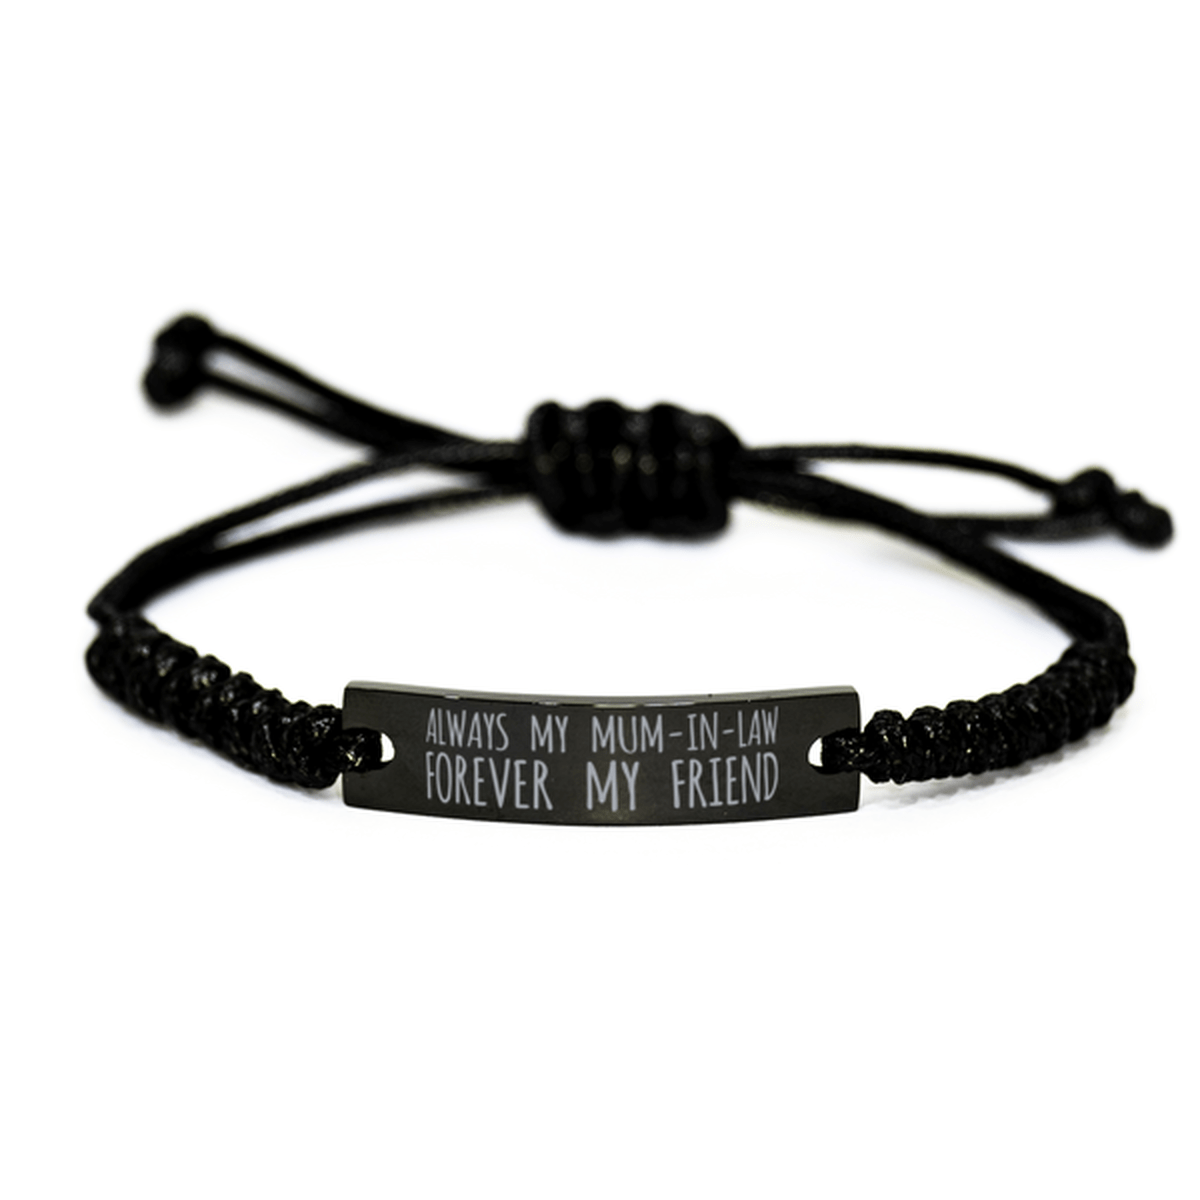 Inspirational Mum-In-Law Black Rope Bracelet, Always My Mum-In-Law Forever My Friend, Best Birthday Gifts For Family